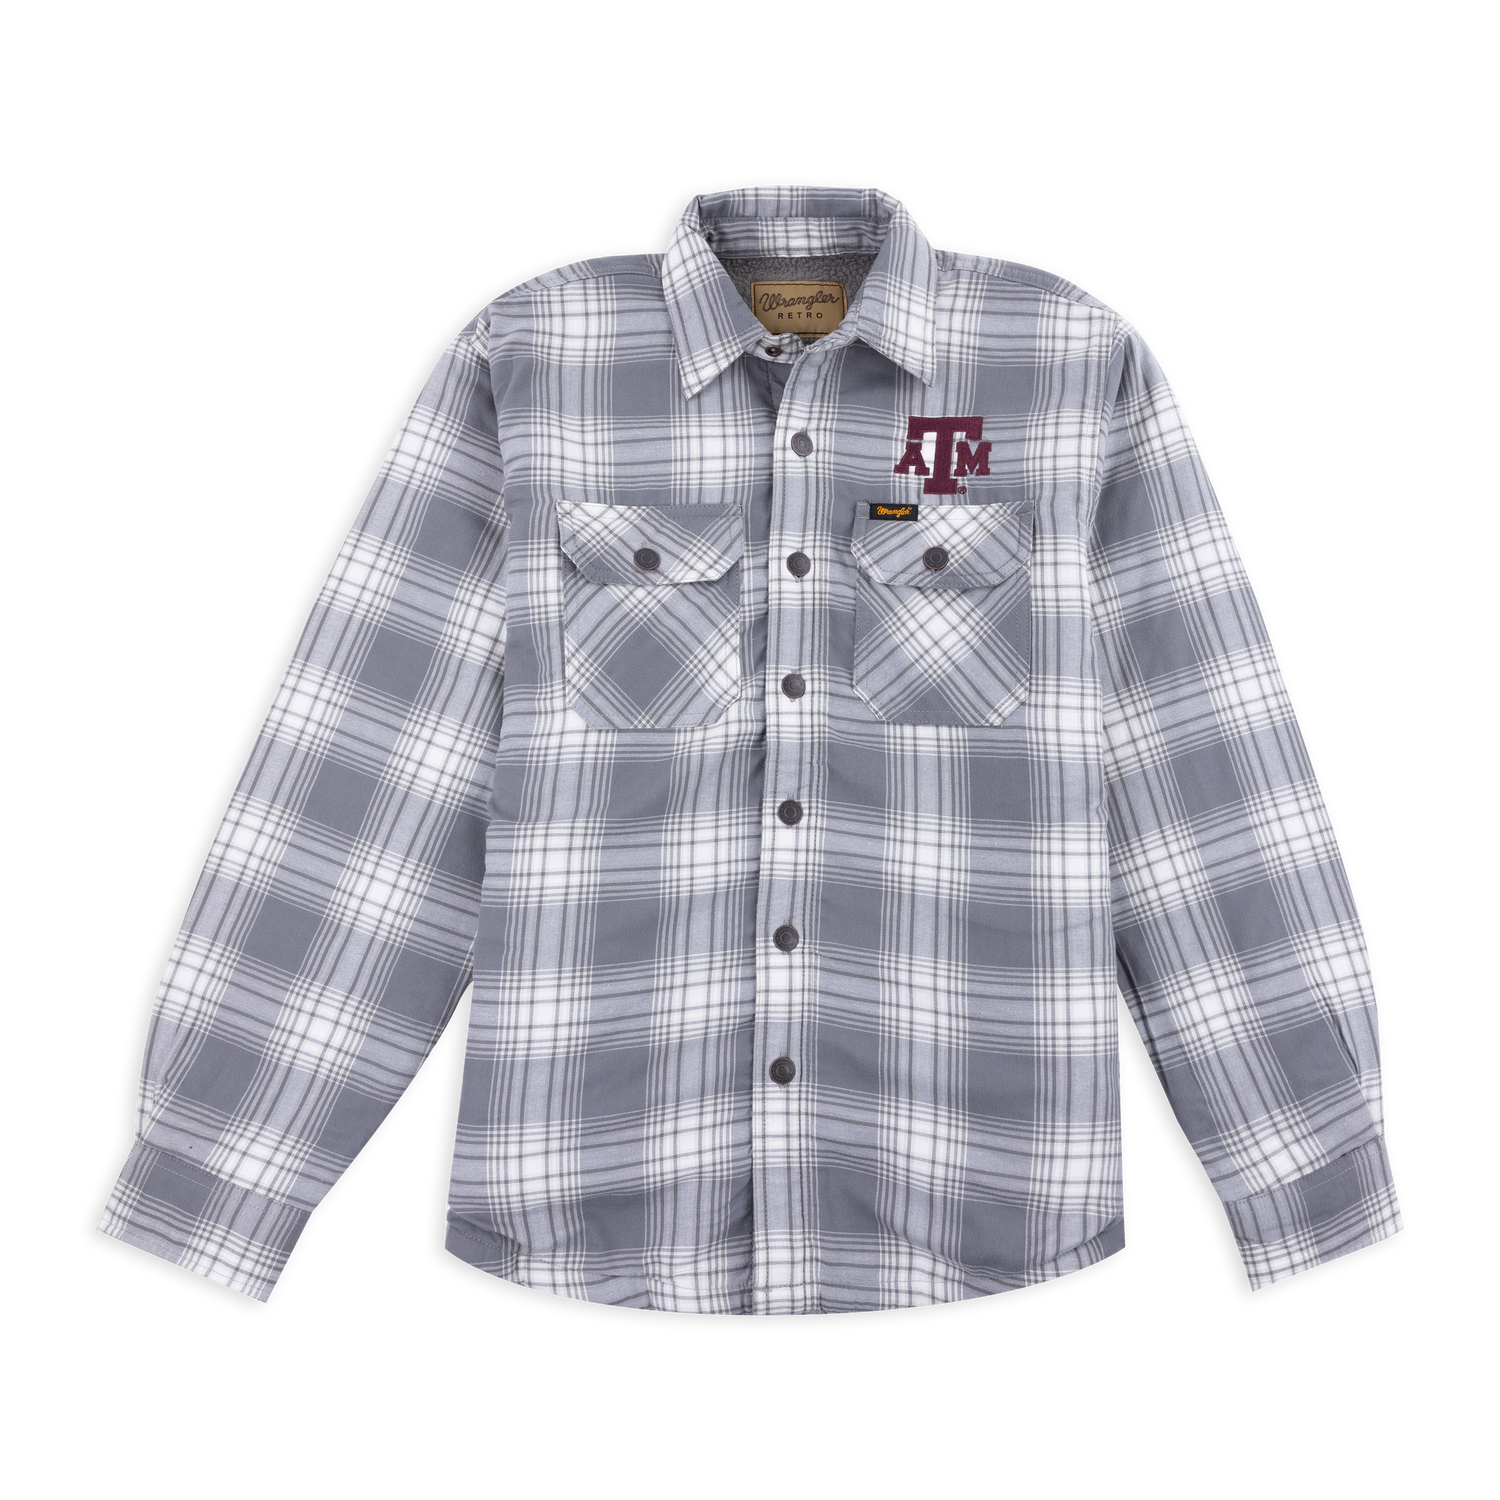 Texas A&M Wrangler Authentic Sherpa Lined Flannel Shirt Jacket